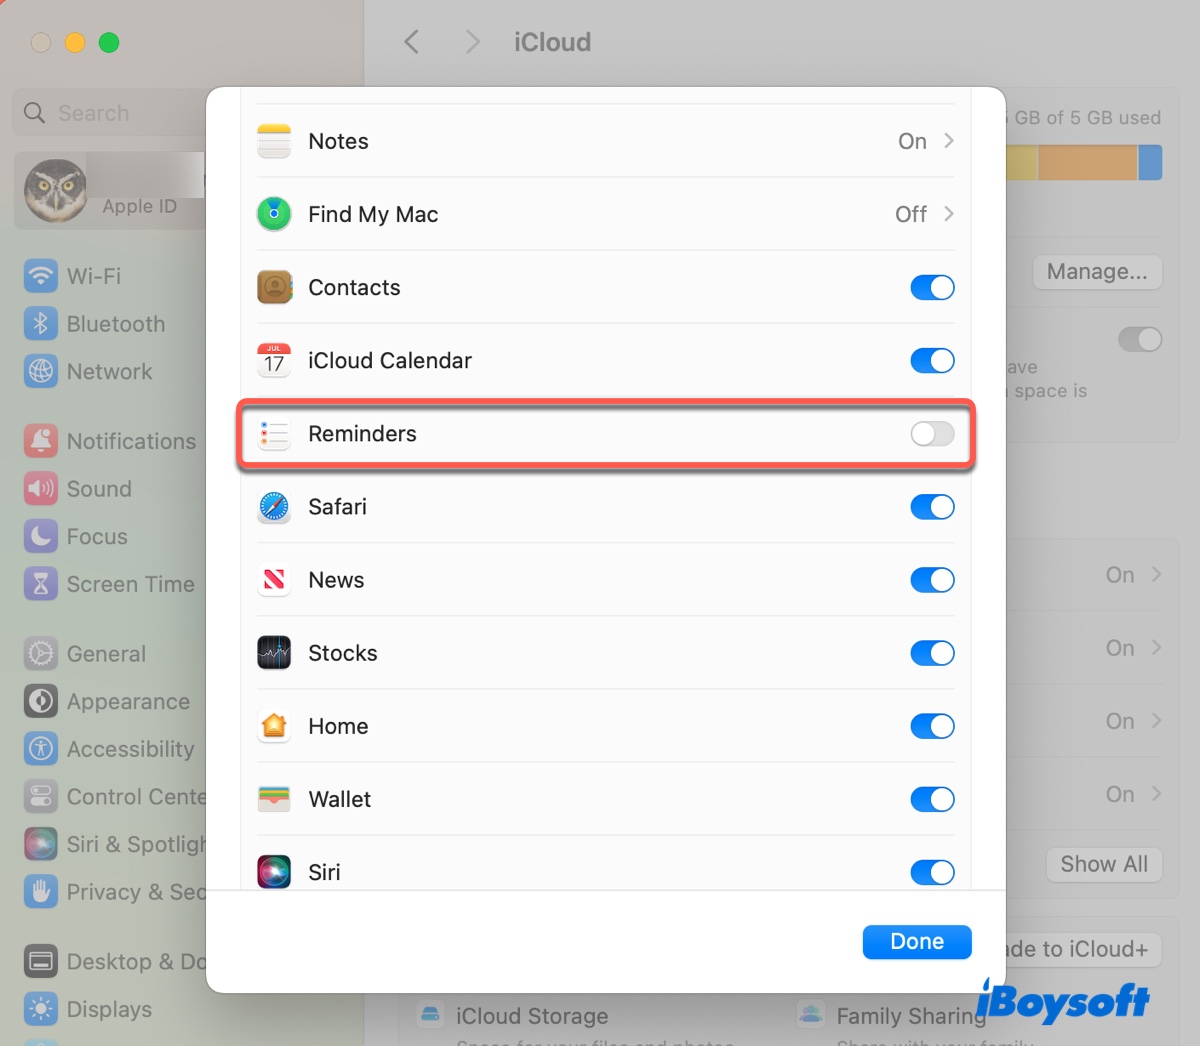 Stop Reminders from syncing with iCloud